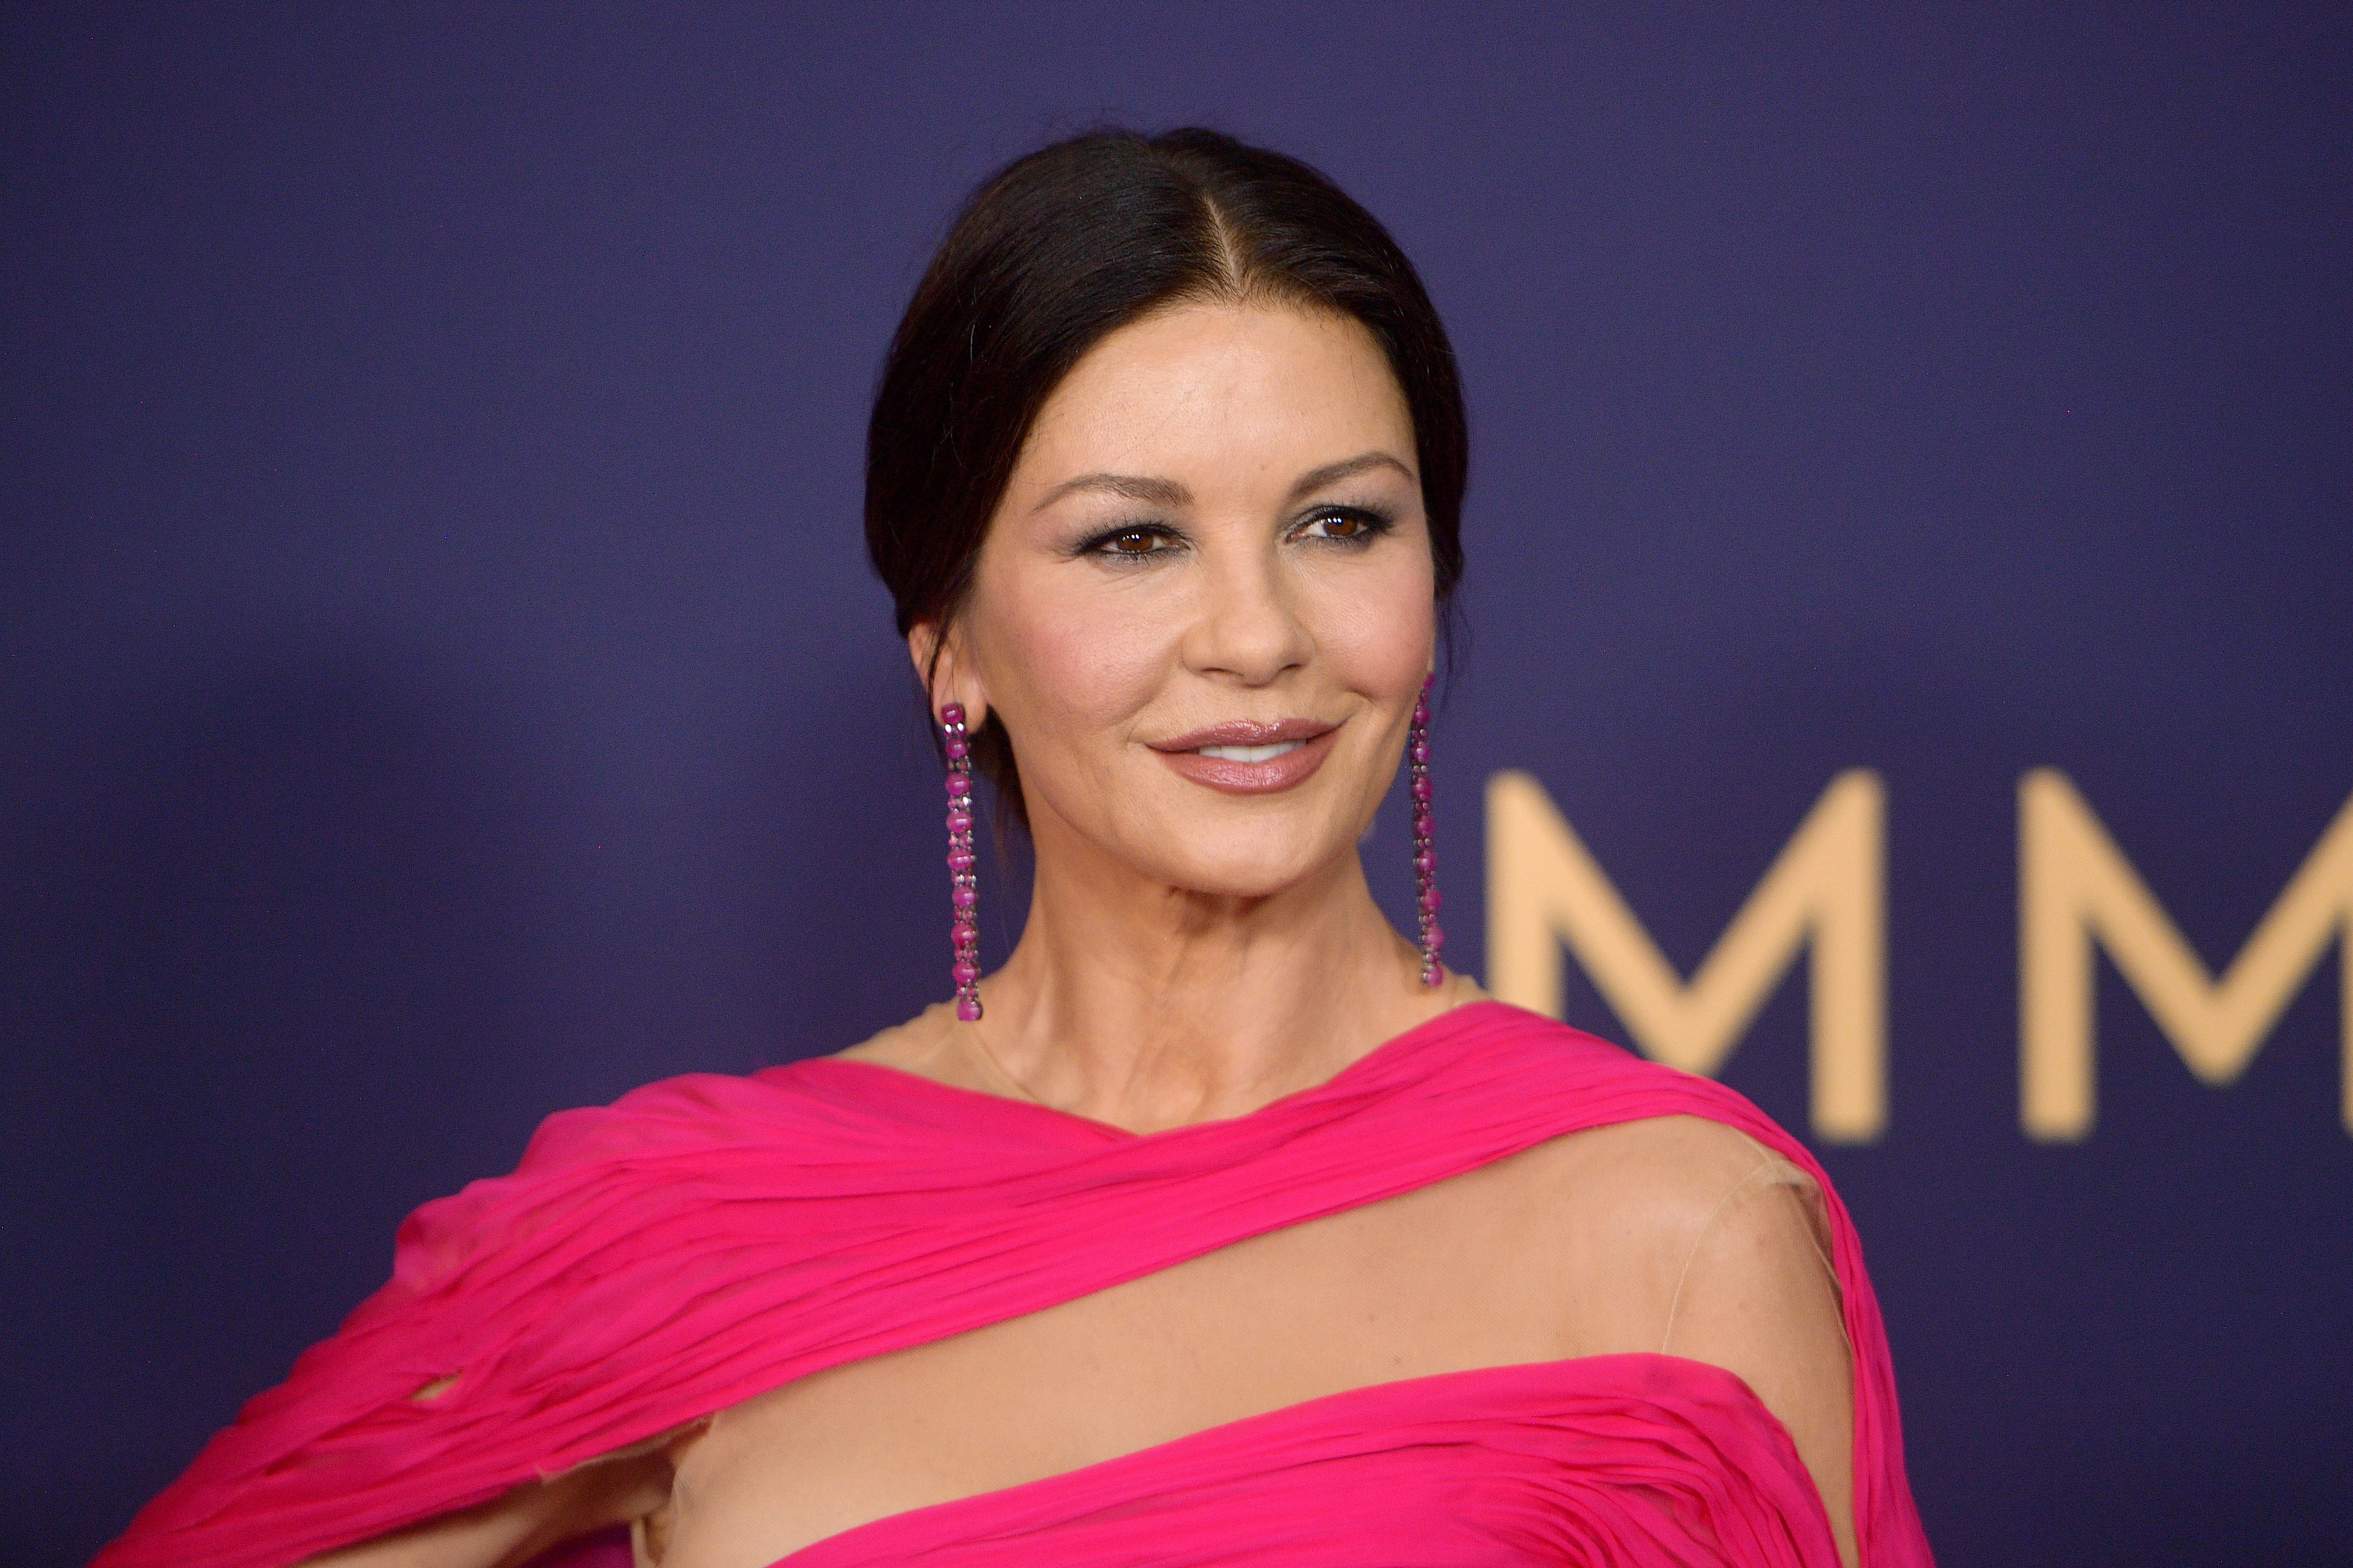 Catherine Zeta-Jones at the 71st Emmy Awards at Microsoft Theater on September 22, 2019 | Photo: Getty Images